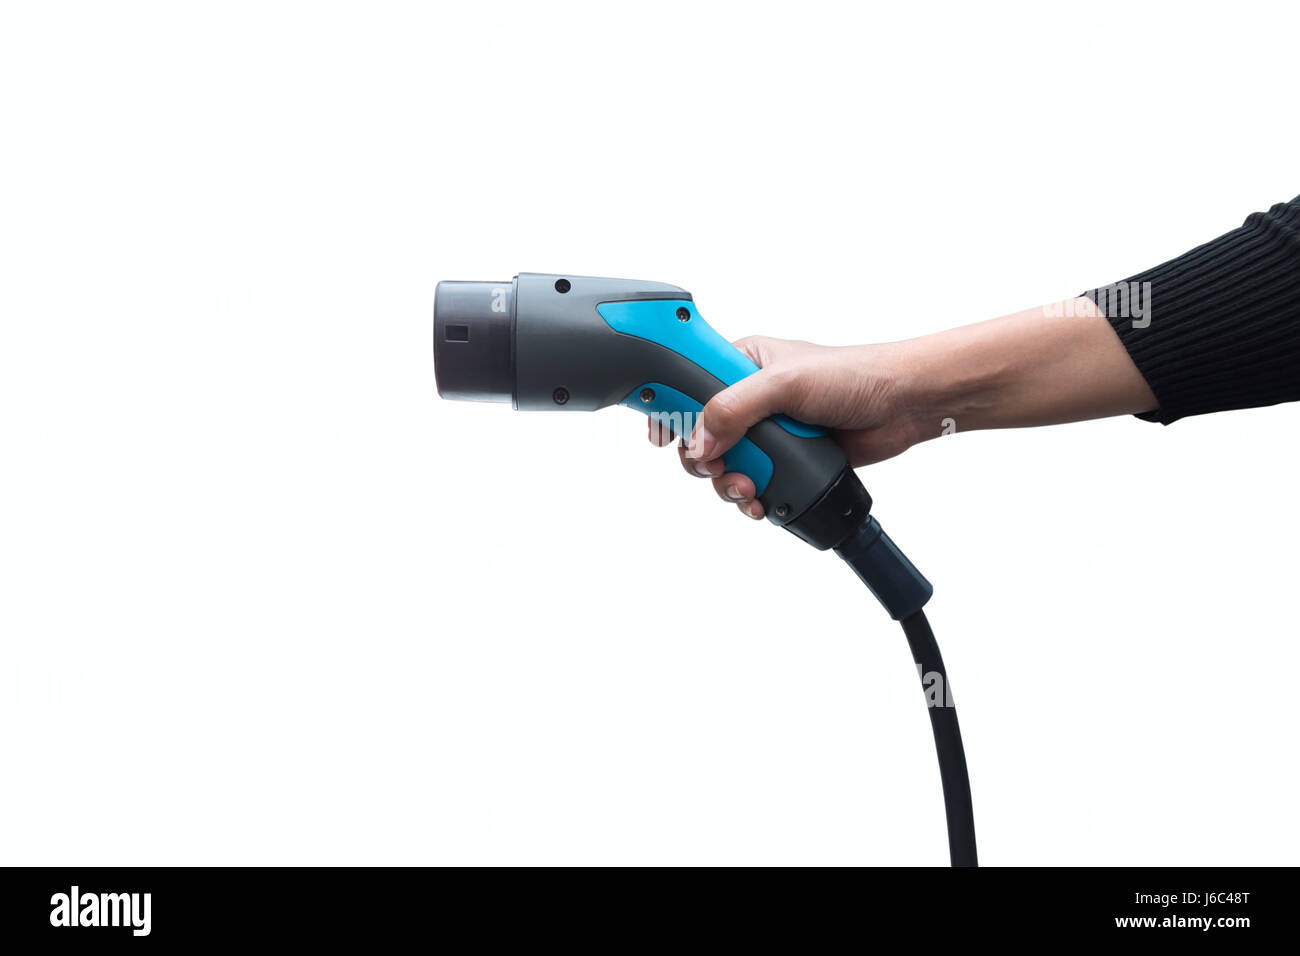 Hand holding Electric car charger on white background. Air pollution and reduce greenhouse gas emissions concept. Stock Photo